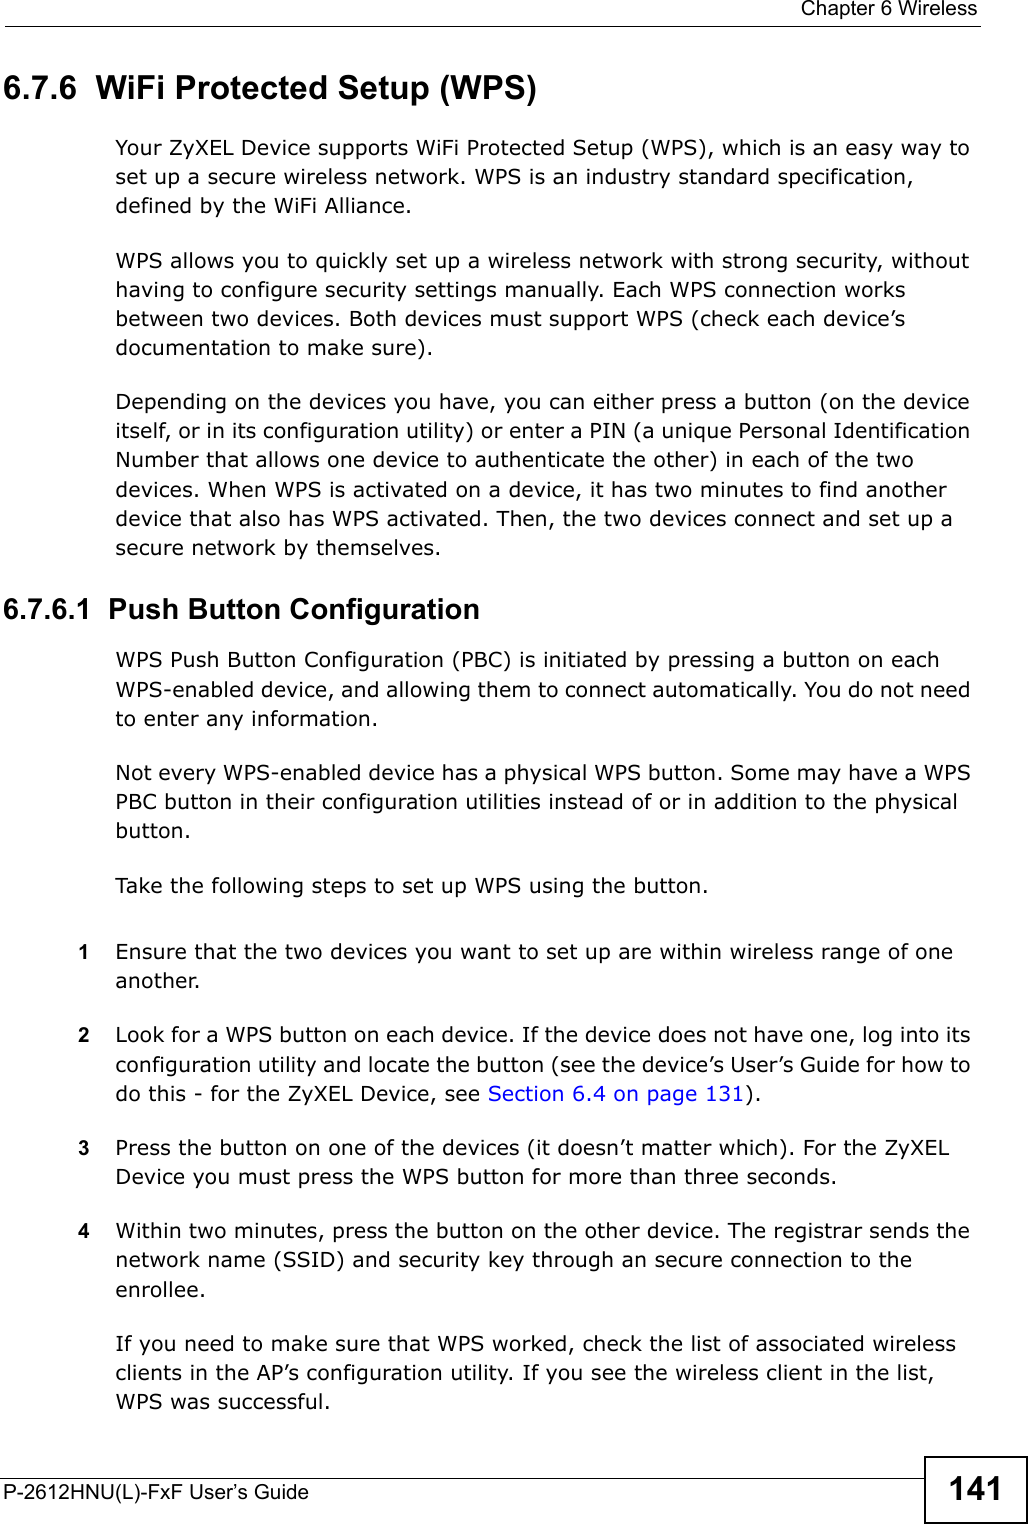  Chapter 6 WirelessP-2612HNU(L)-FxF User’s Guide 1416.7.6  WiFi Protected Setup (WPS)Your ZyXEL Device supports WiFi Protected Setup (WPS), which is an easy way to set up a secure wireless network. WPS is an industry standard specification, defined by the WiFi Alliance.WPS allows you to quickly set up a wireless network with strong security, without having to configure security settings manually. Each WPS connection works between two devices. Both devices must support WPS (check each device’sdocumentation to make sure).Depending on the devices you have, you can either press a button (on the device itself, or in its configuration utility) or enter a PIN (a unique Personal Identification Number that allows one device to authenticate the other) in each of the two devices. When WPS is activated on a device, it has two minutes to find another device that also has WPS activated. Then, the two devices connect and set up a secure network by themselves.6.7.6.1  Push Button ConfigurationWPS Push Button Configuration (PBC) is initiated by pressing a button on eachWPS-enabled device, and allowing them to connect automatically. You do not need to enter any information. Not every WPS-enabled device has a physical WPS button. Some may have a WPS PBC button in their configuration utilities instead of or in addition to the physical button.Take the following steps to set up WPS using the button.1Ensure that the two devices you want to set up are within wireless range of one another.2Look for a WPS button on each device. If the device does not have one, log into itsconfiguration utility and locate the button (see the device’s User’s Guide for how to do this - for the ZyXEL Device, see Section 6.4 on page 131).3Press the button on one of the devices (it doesn’t matter which). For the ZyXELDevice you must press the WPS button for more than three seconds.4Within two minutes, press the button on the other device. The registrar sends the network name (SSID) and security key through an secure connection to the enrollee.If you need to make sure that WPS worked, check the list of associated wireless clients in the AP’s configuration utility. If you see the wireless client in the list,WPS was successful.